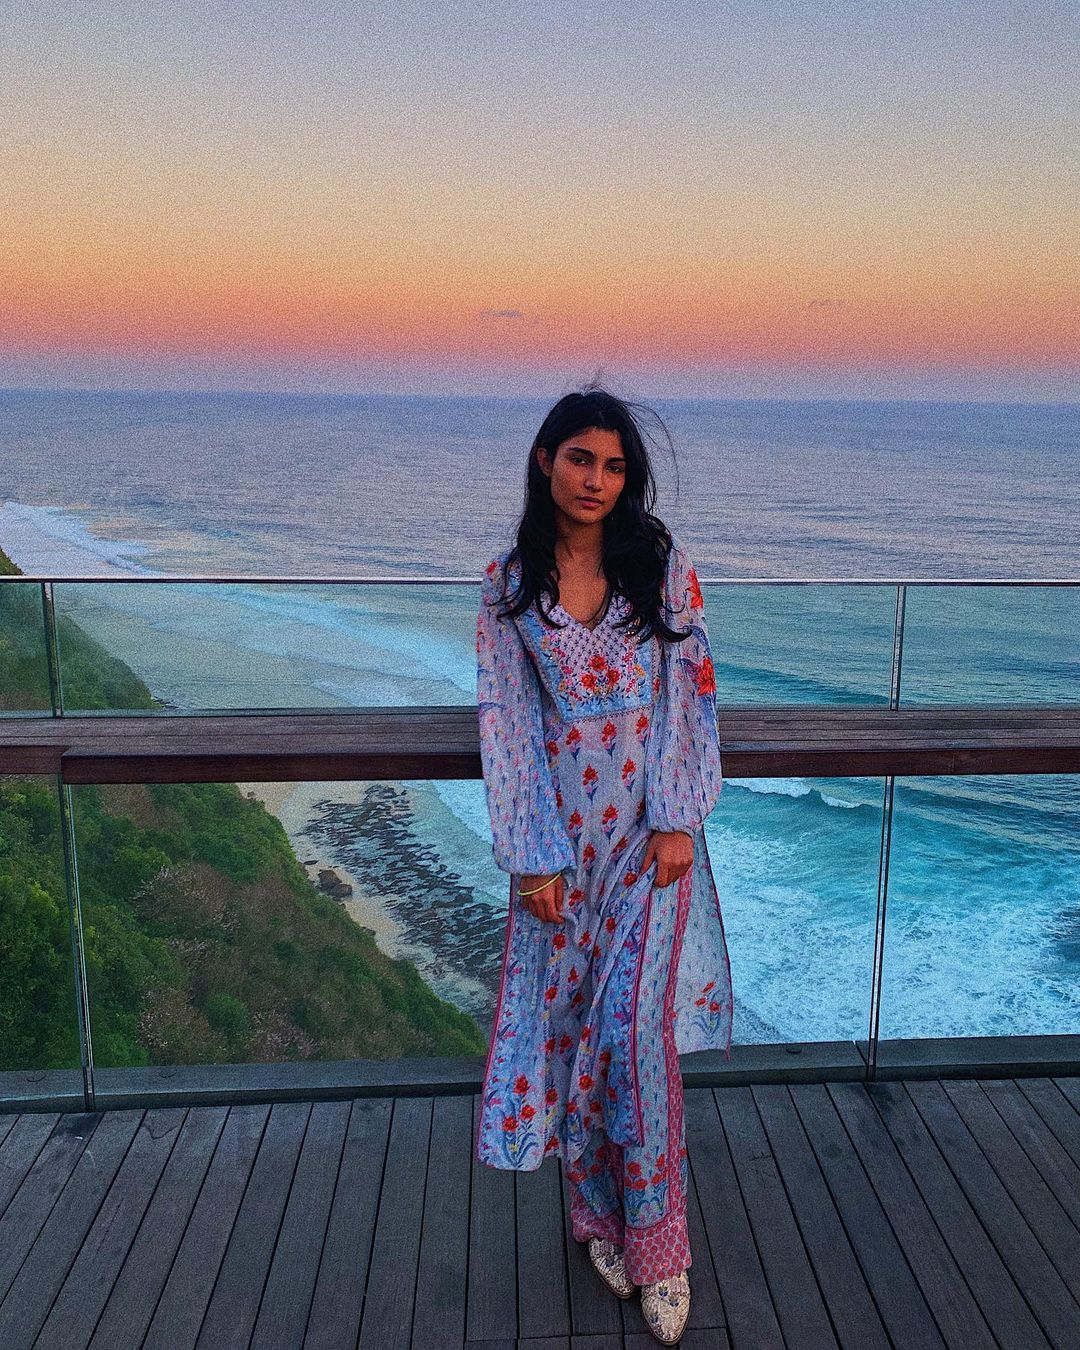 66430908 126655865238993 2110376882582501456 n Salman Khan's niece Alizeh is very fond of traveling, sometimes in the mountains and sometimes on the seashore, enjoys the vacation